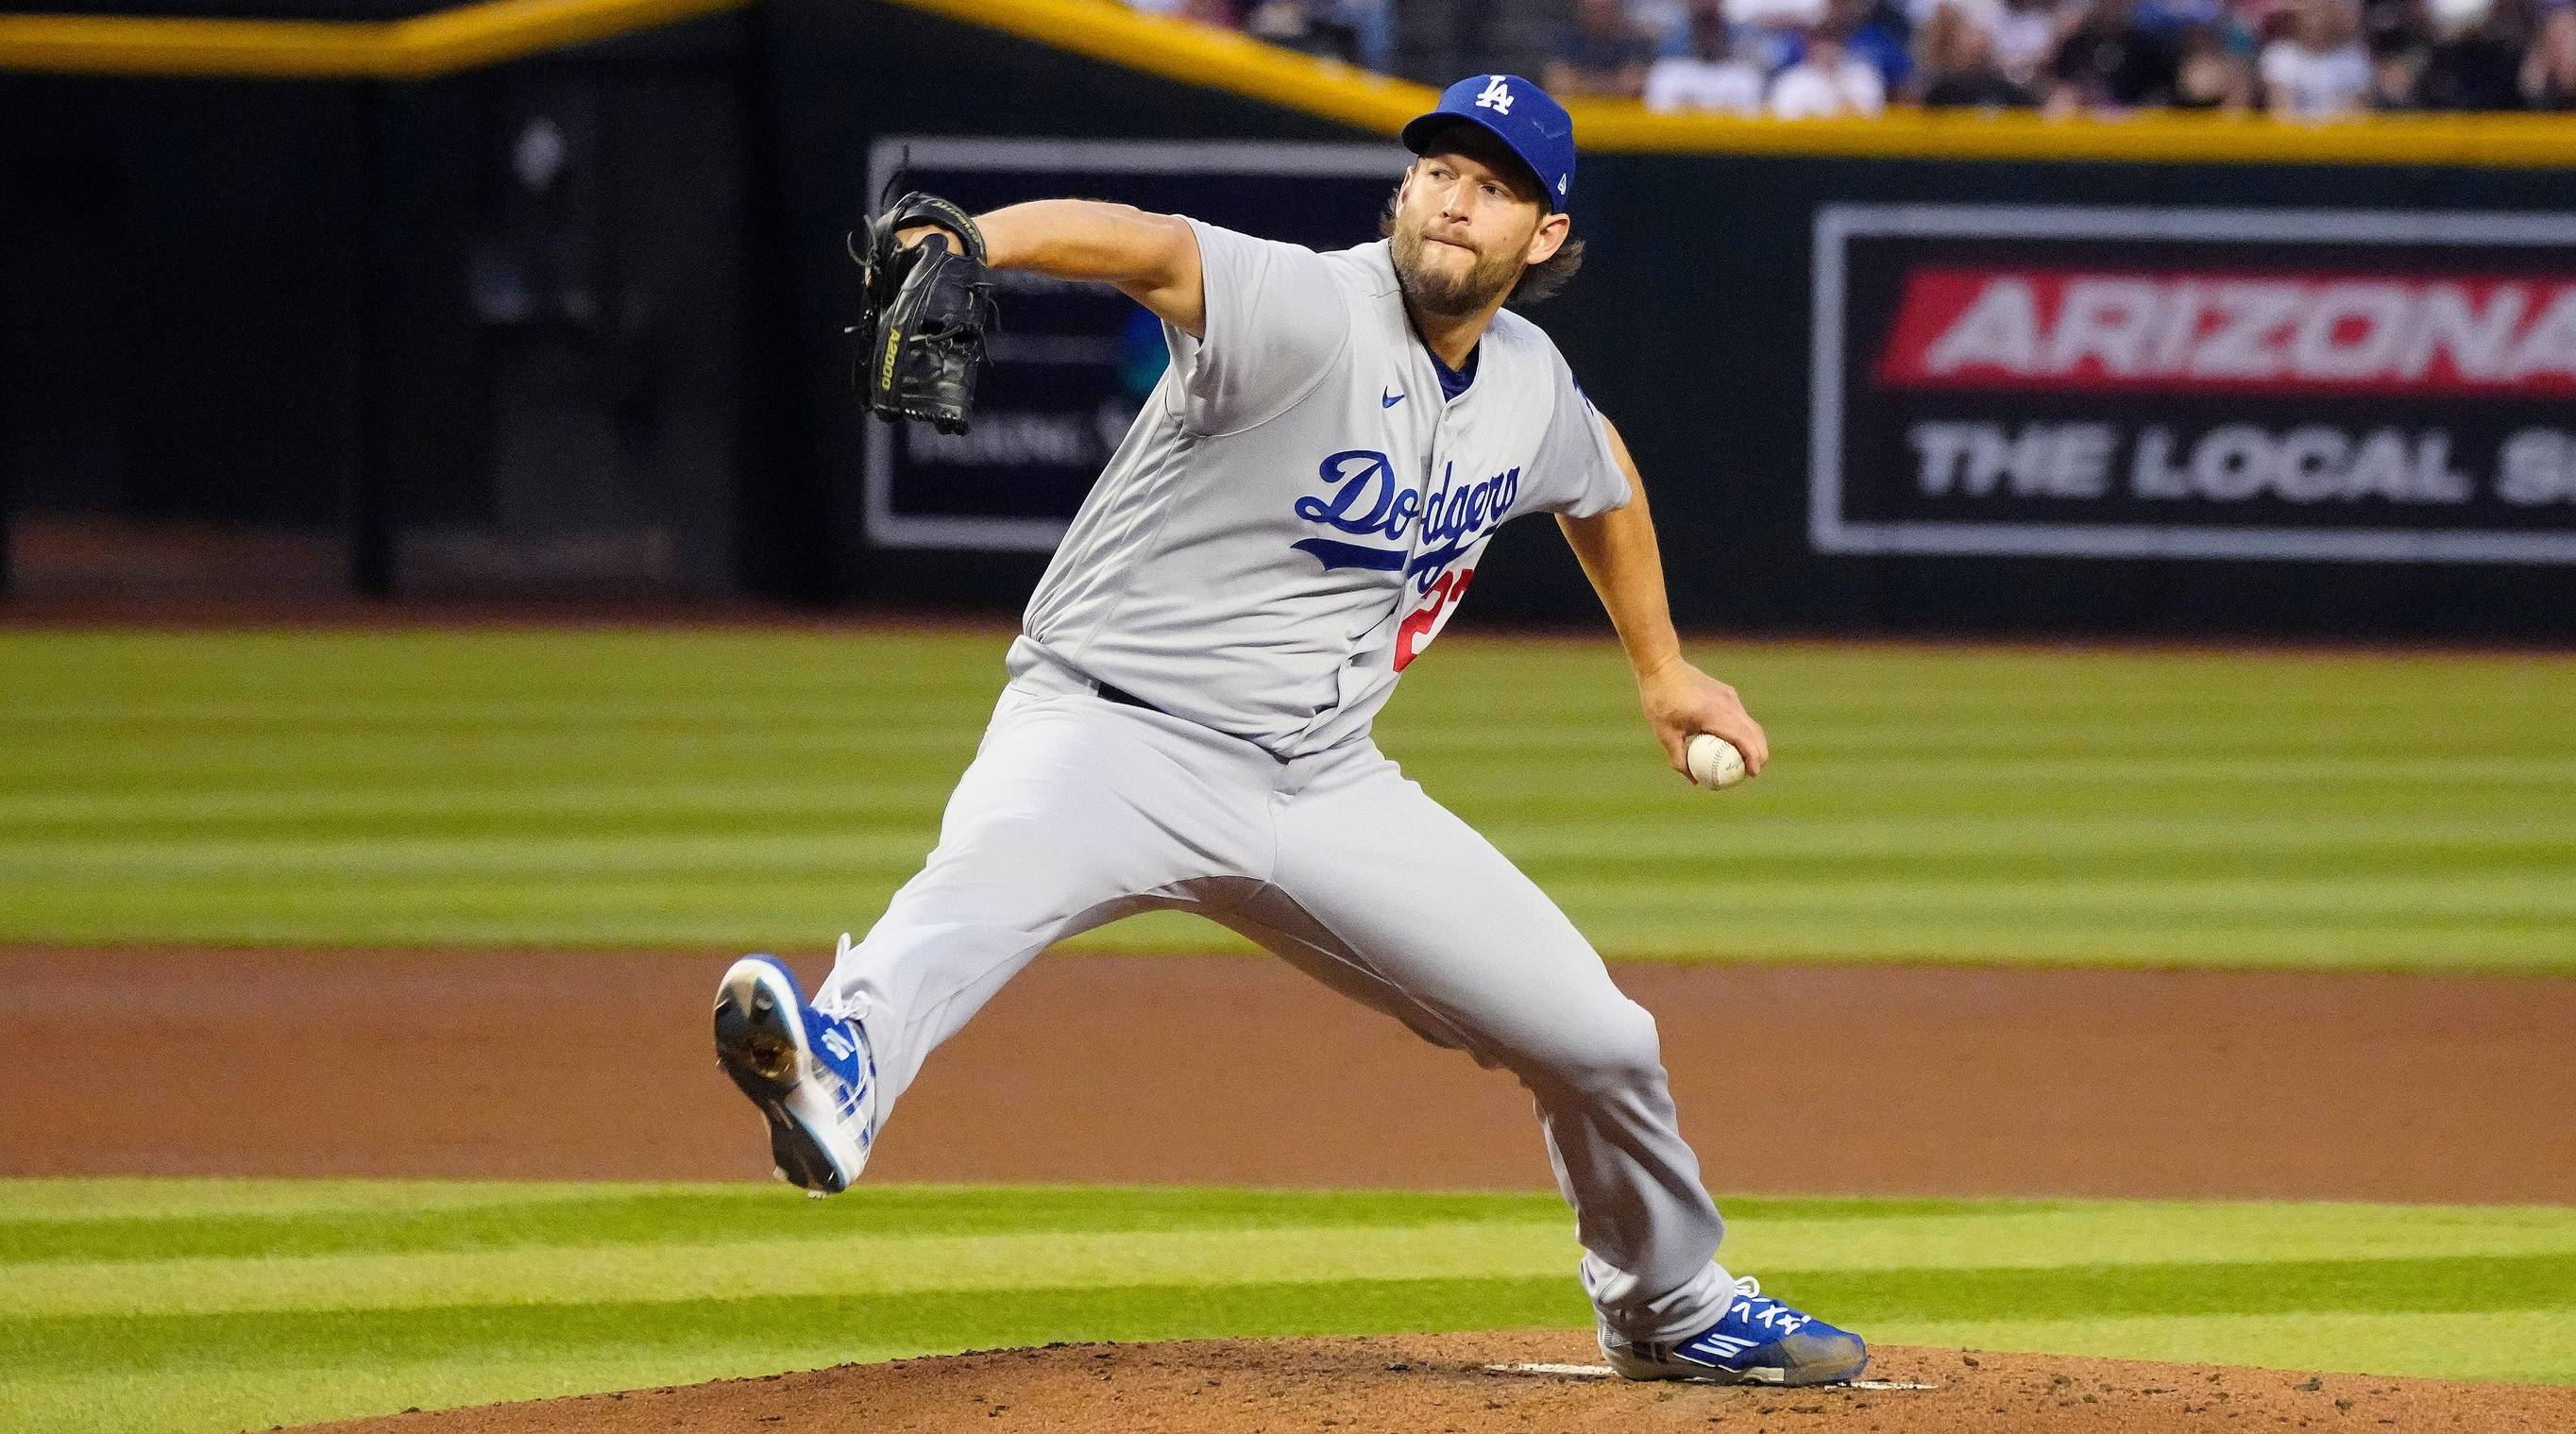 As Clayton Kershaw tries to pitch his way to October glory, you